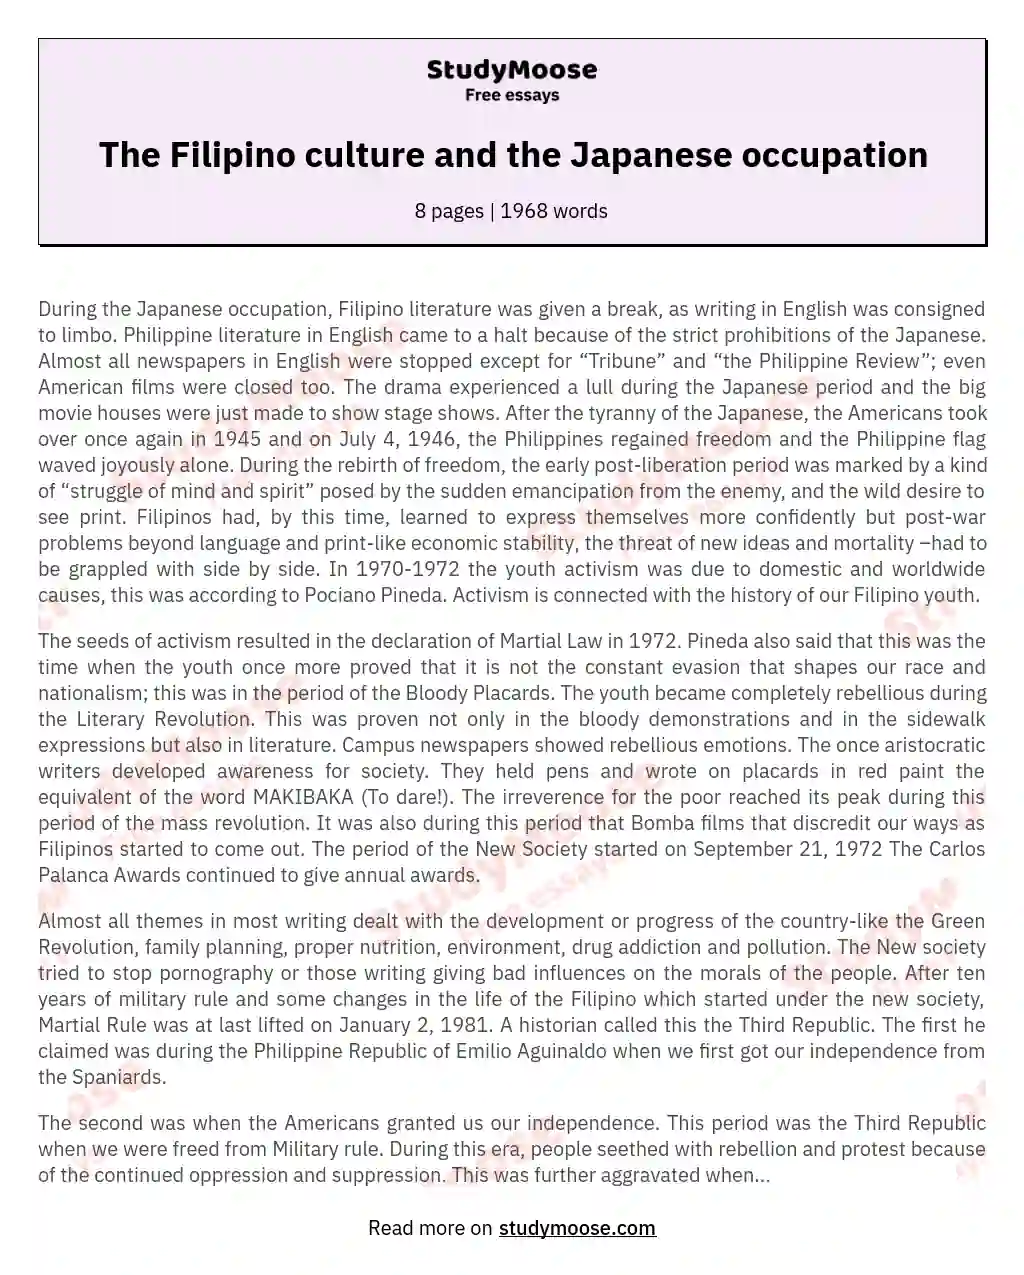 The Filipino culture and the Japanese occupation essay